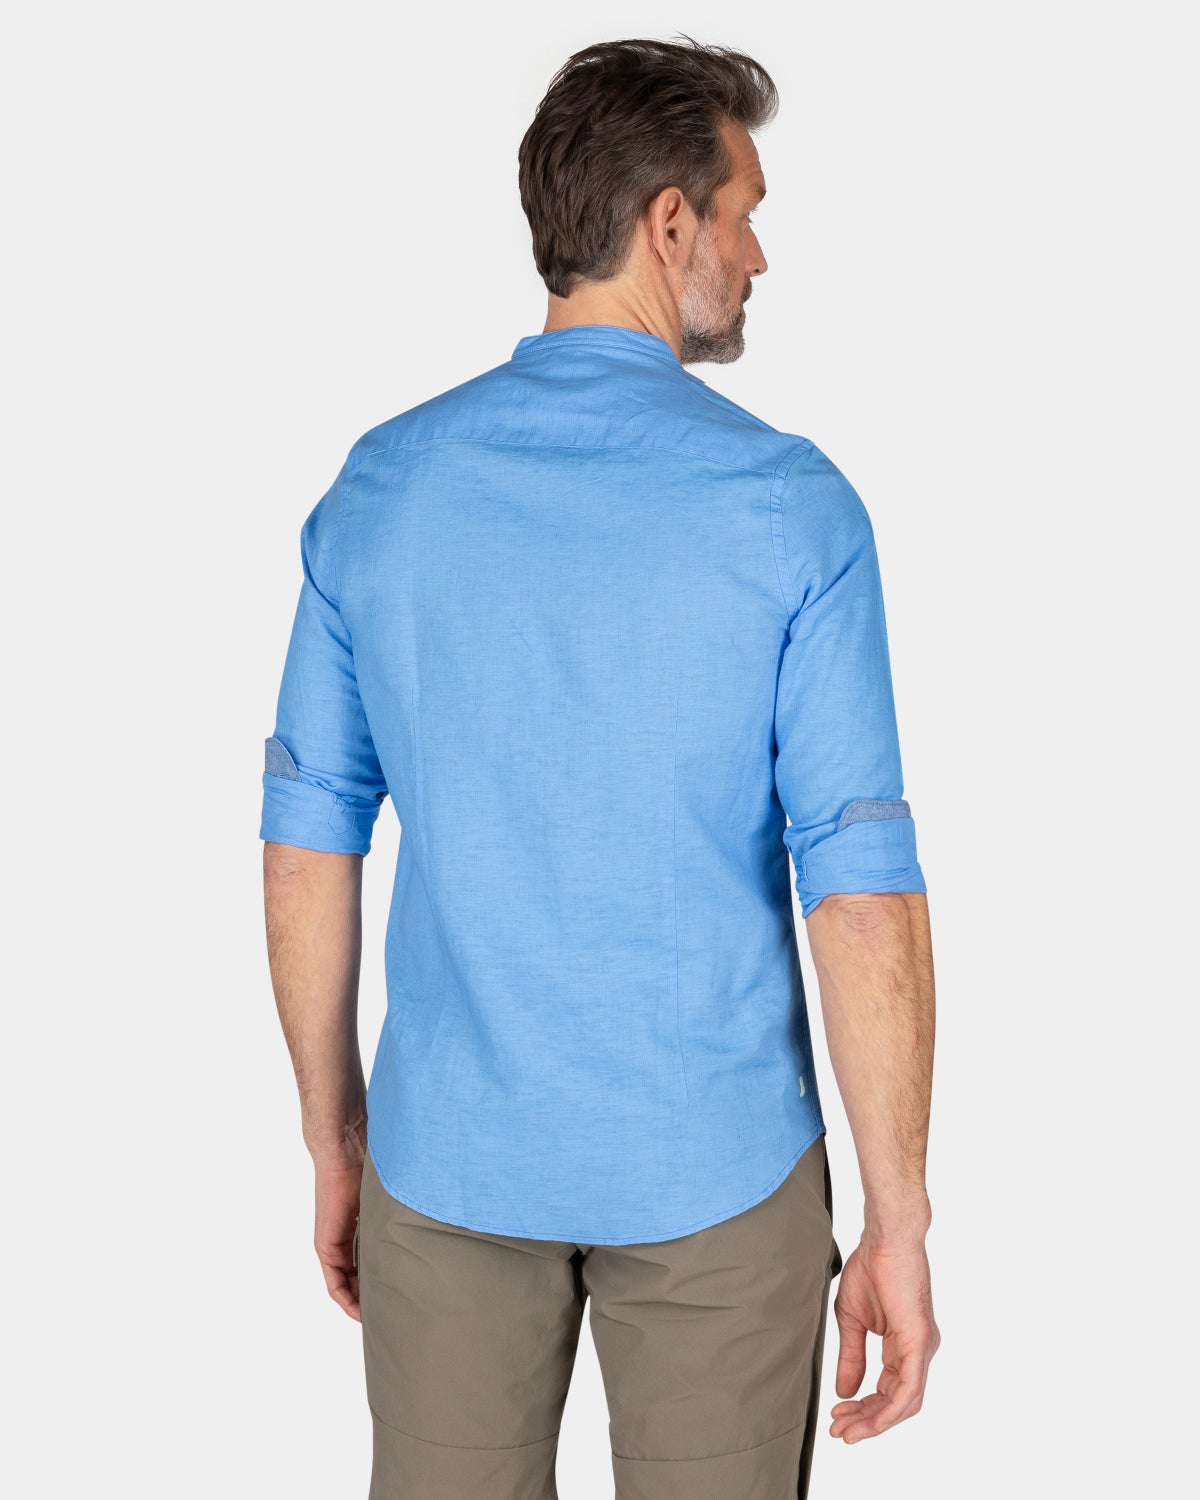 Plain shirt without collar - Bed Blue